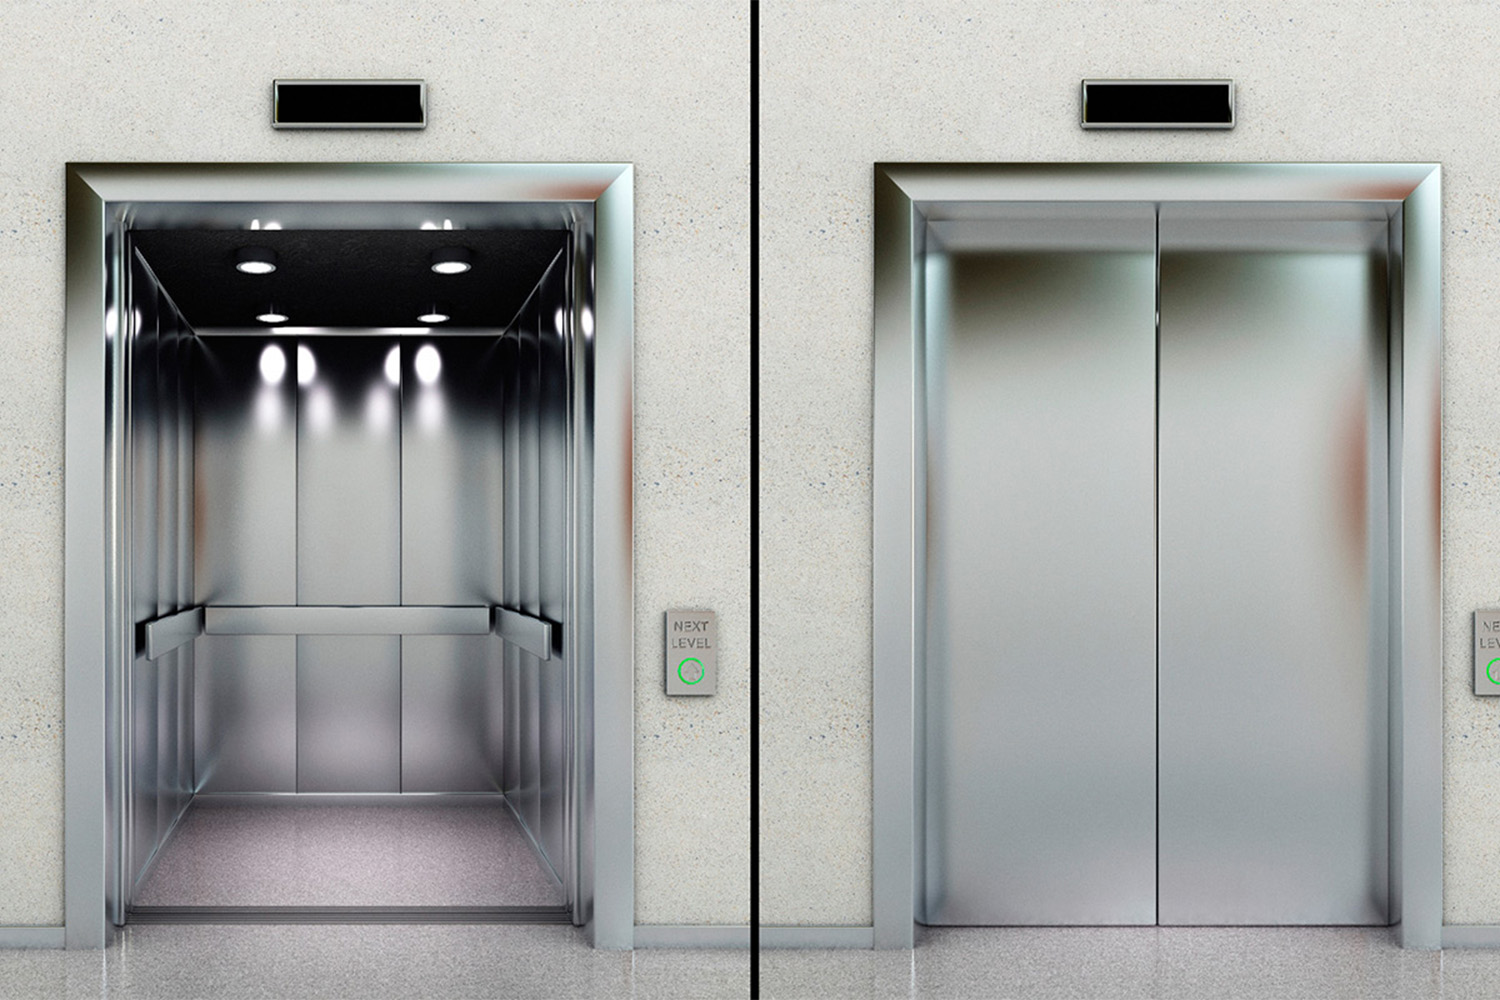 2 images of a silver elevator - one opened, one closed 